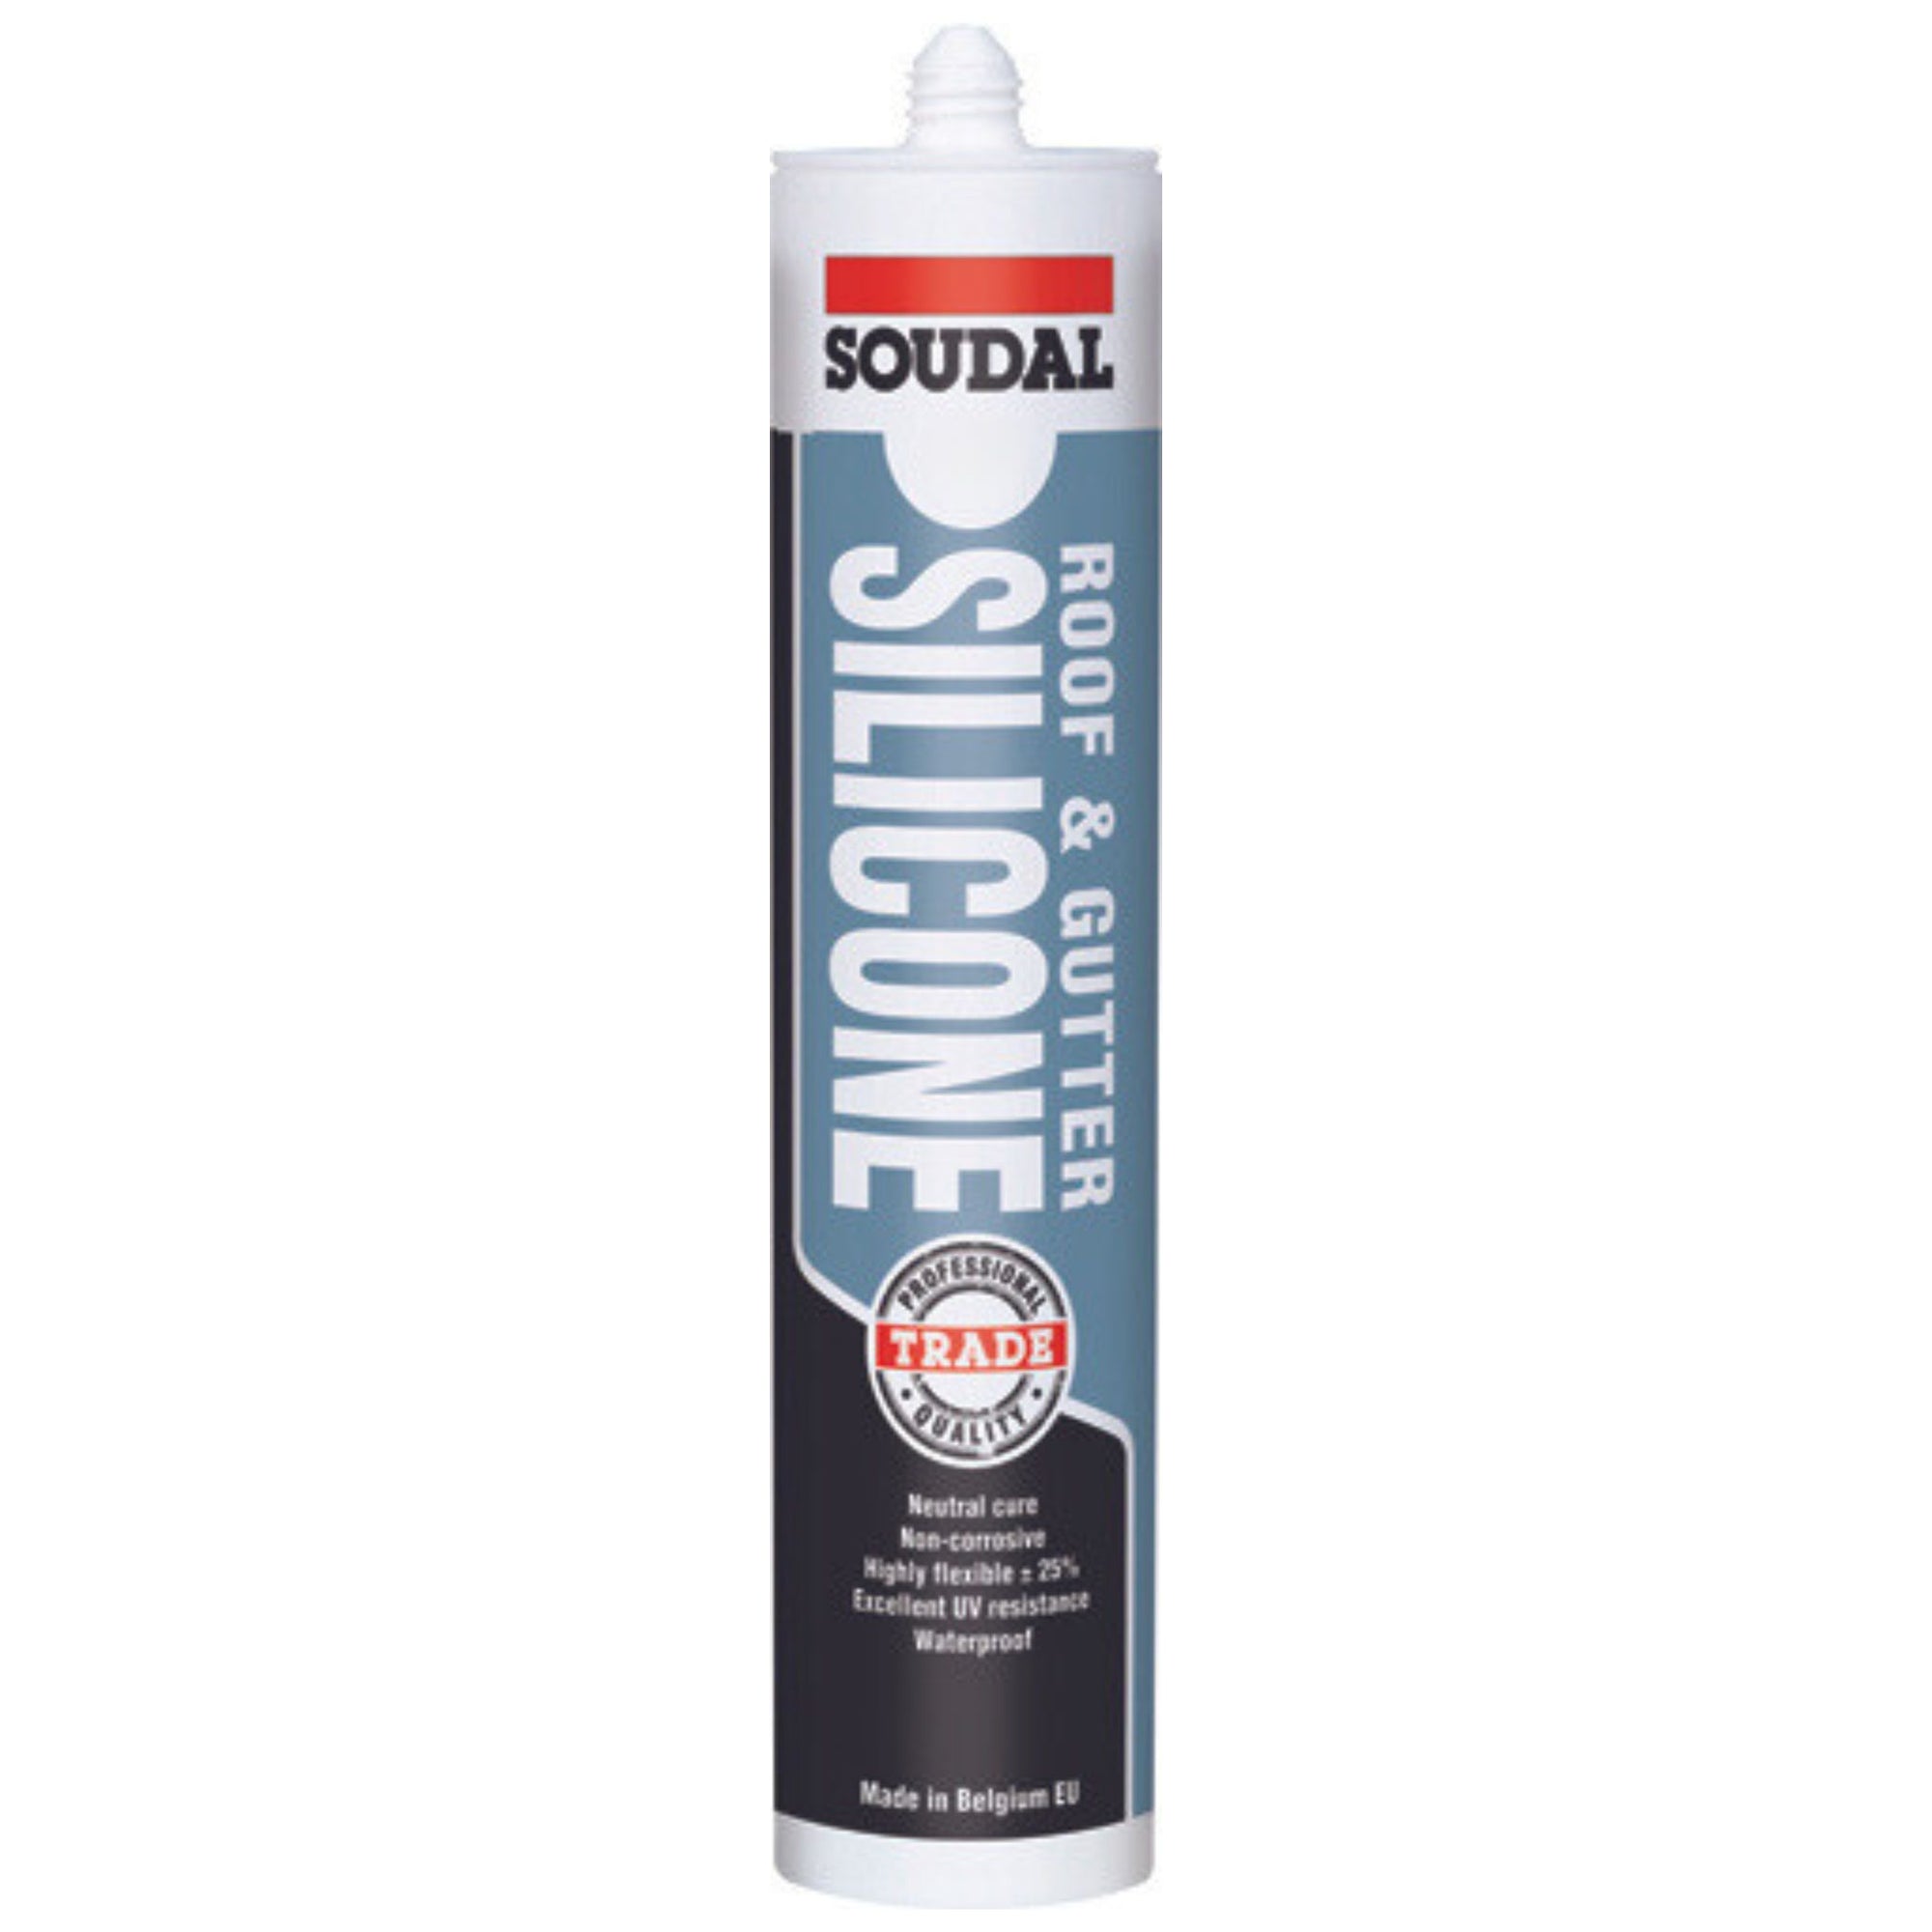 Soudal 127778 Roof & Gutter Neutral Cure Silicone, Grey